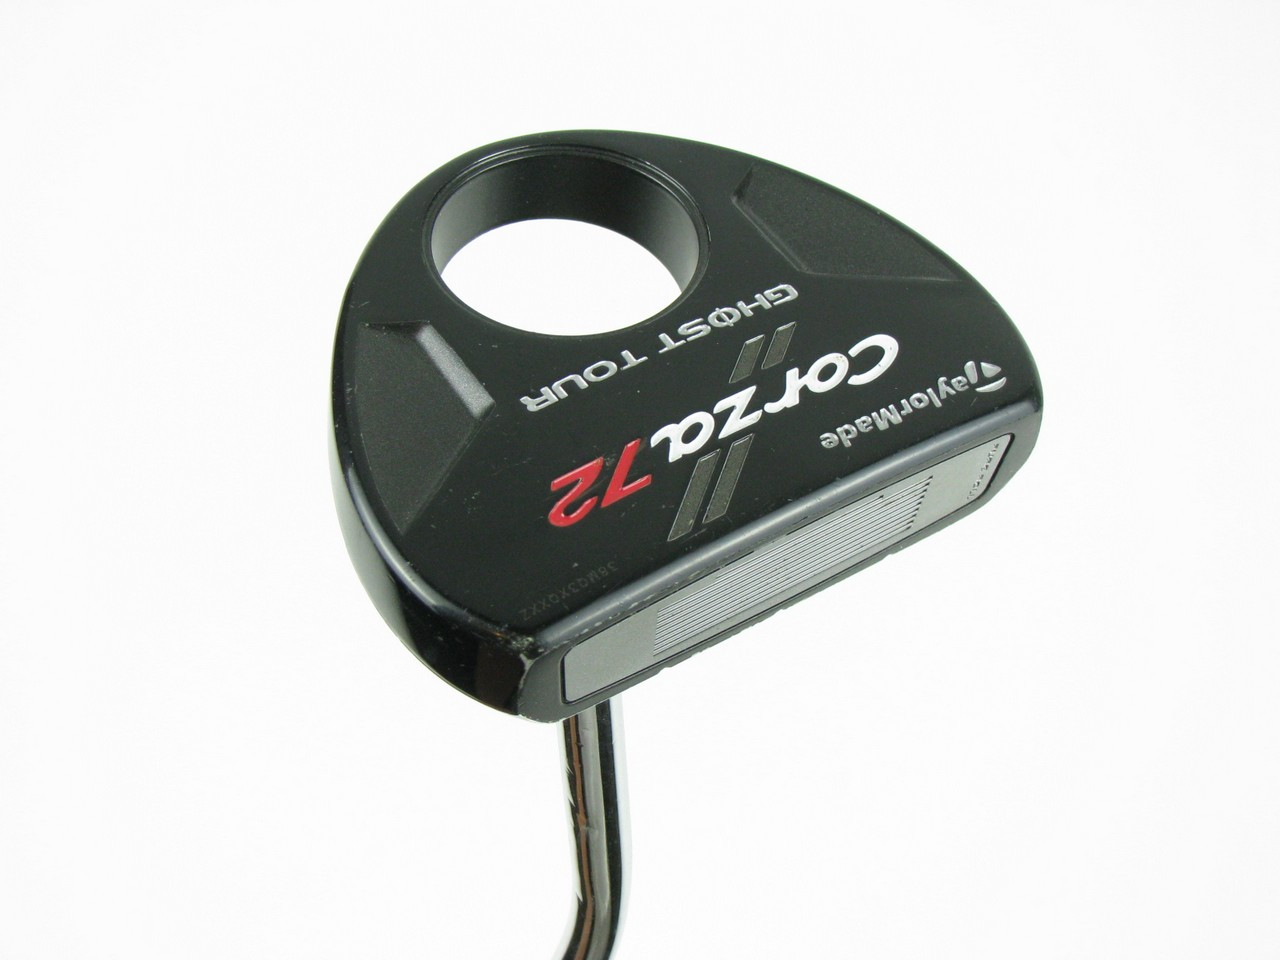 taylormade ghost tour corza 72 putter